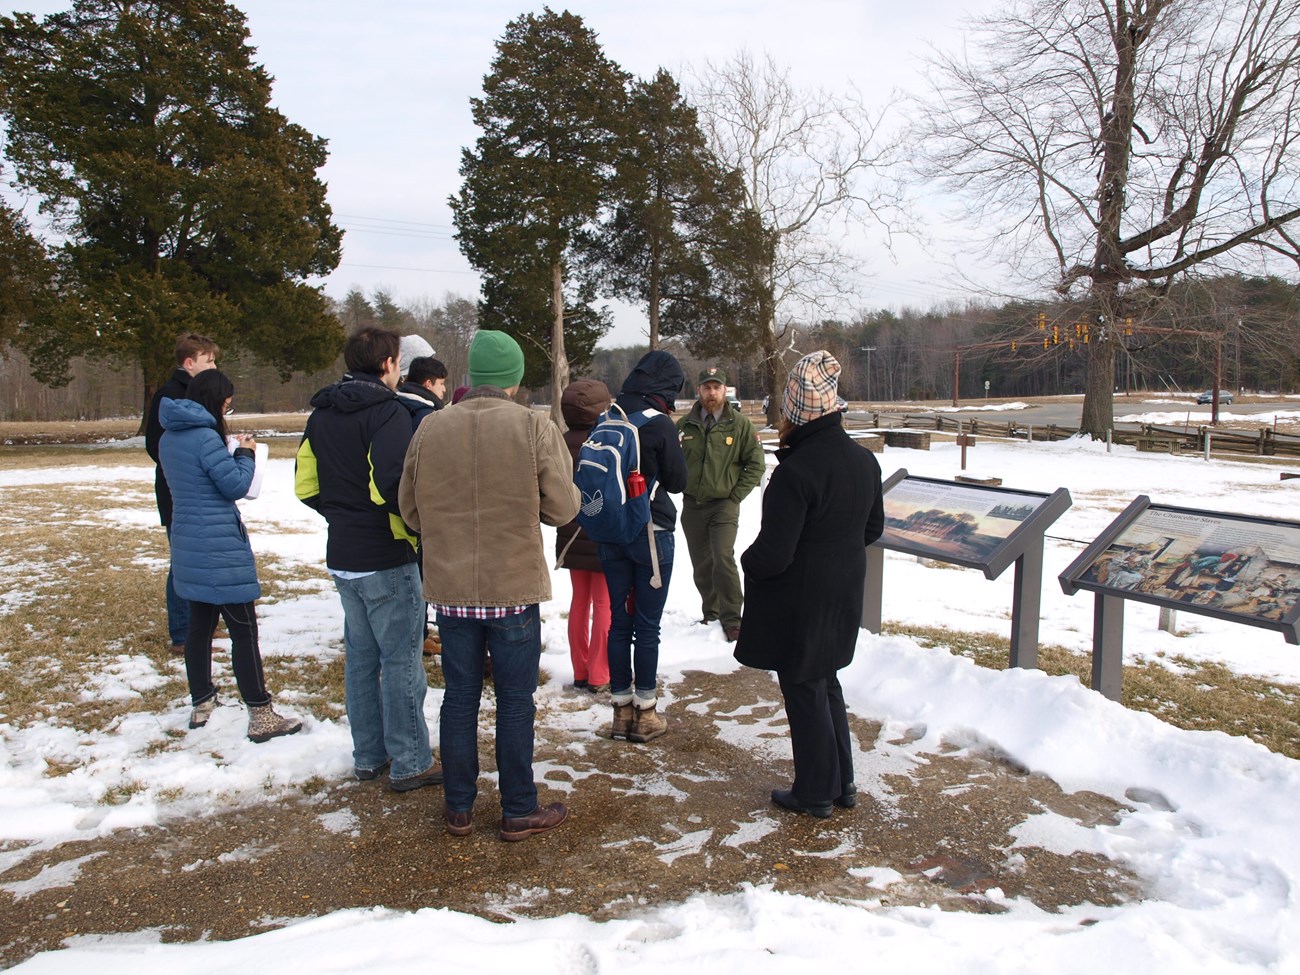 A man in NPS uniform talks to a small group, standing on patches of snow